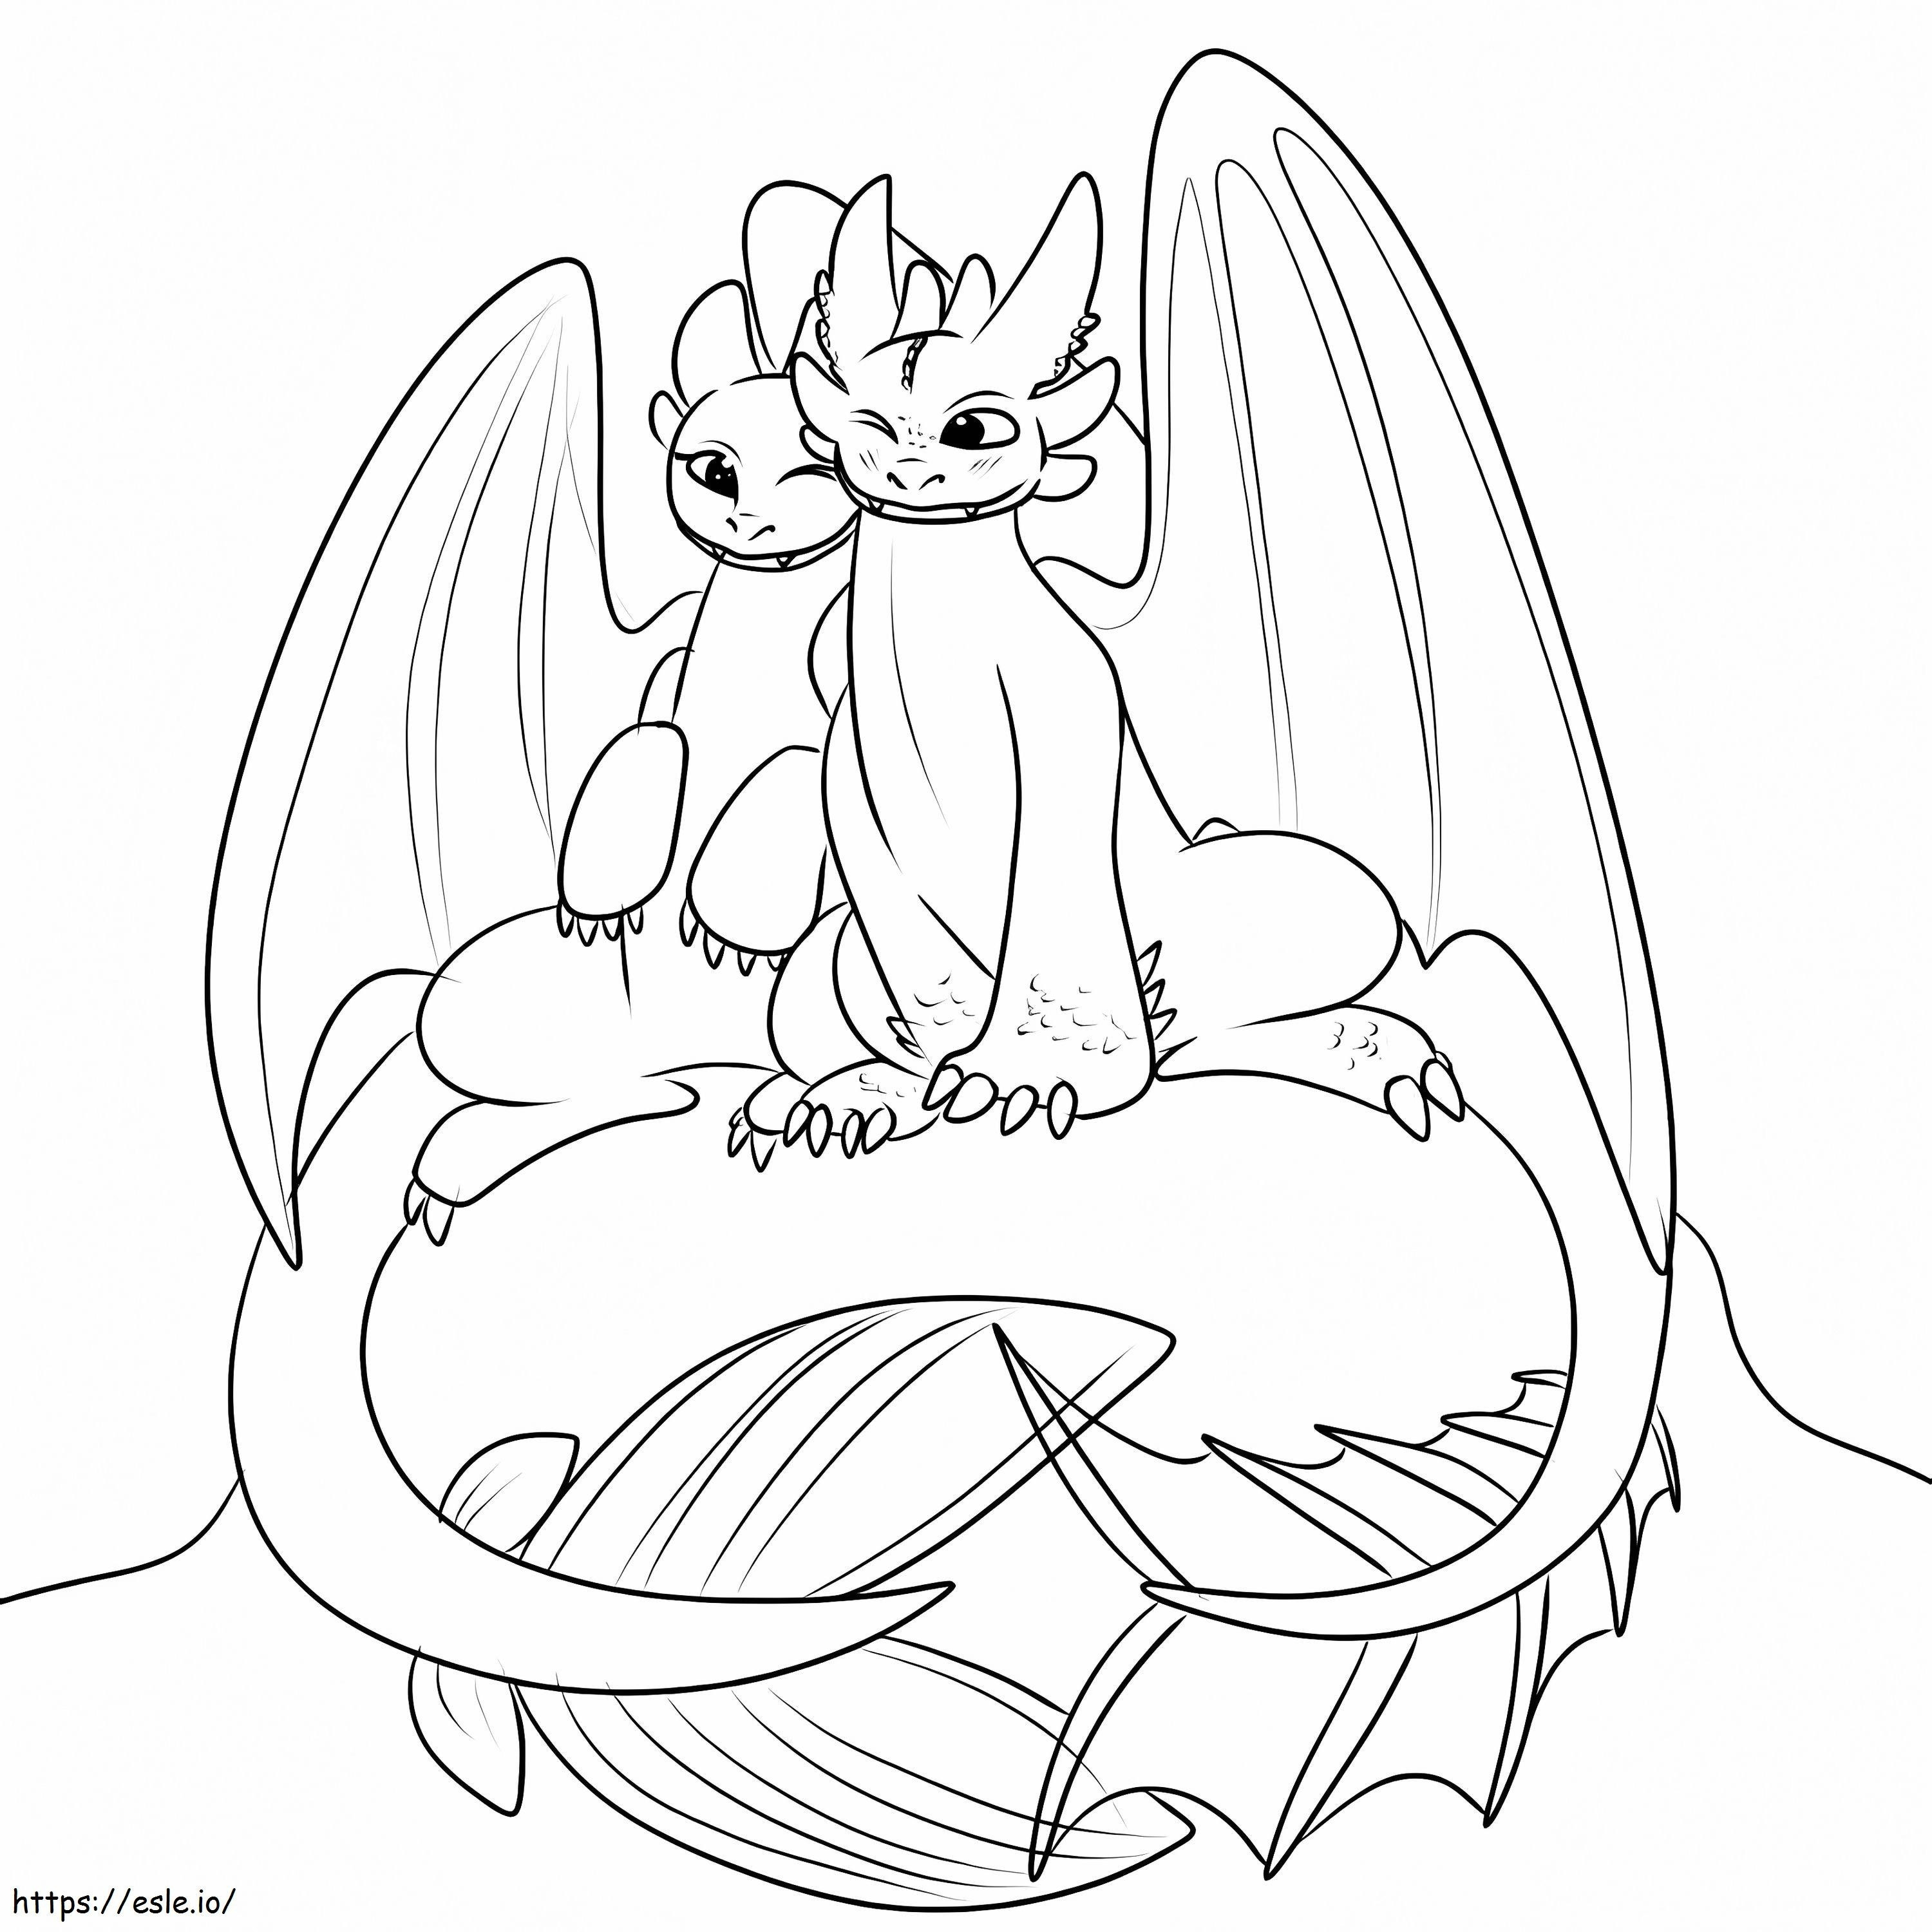 Toothless In Love coloring page